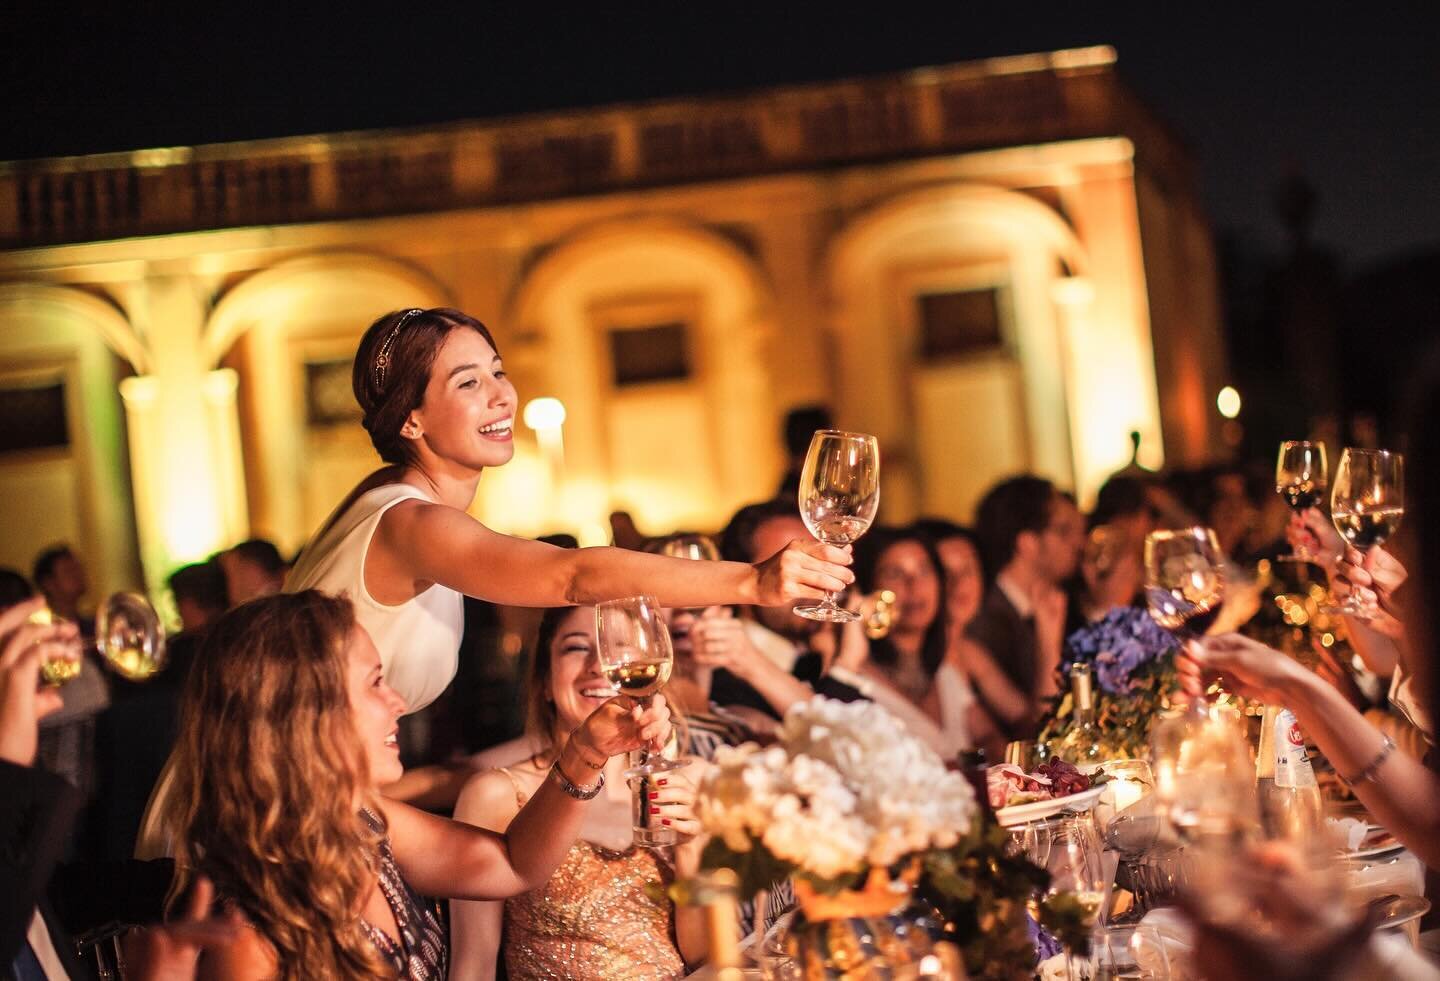 Et Voila - here we are! A good time to be had.  We really really love these pictures of our bride and her guests dining alfresco and raising their glasses under the stars, in the beautiful gardens of one of Sicily&rsquo;s most important baroque estat